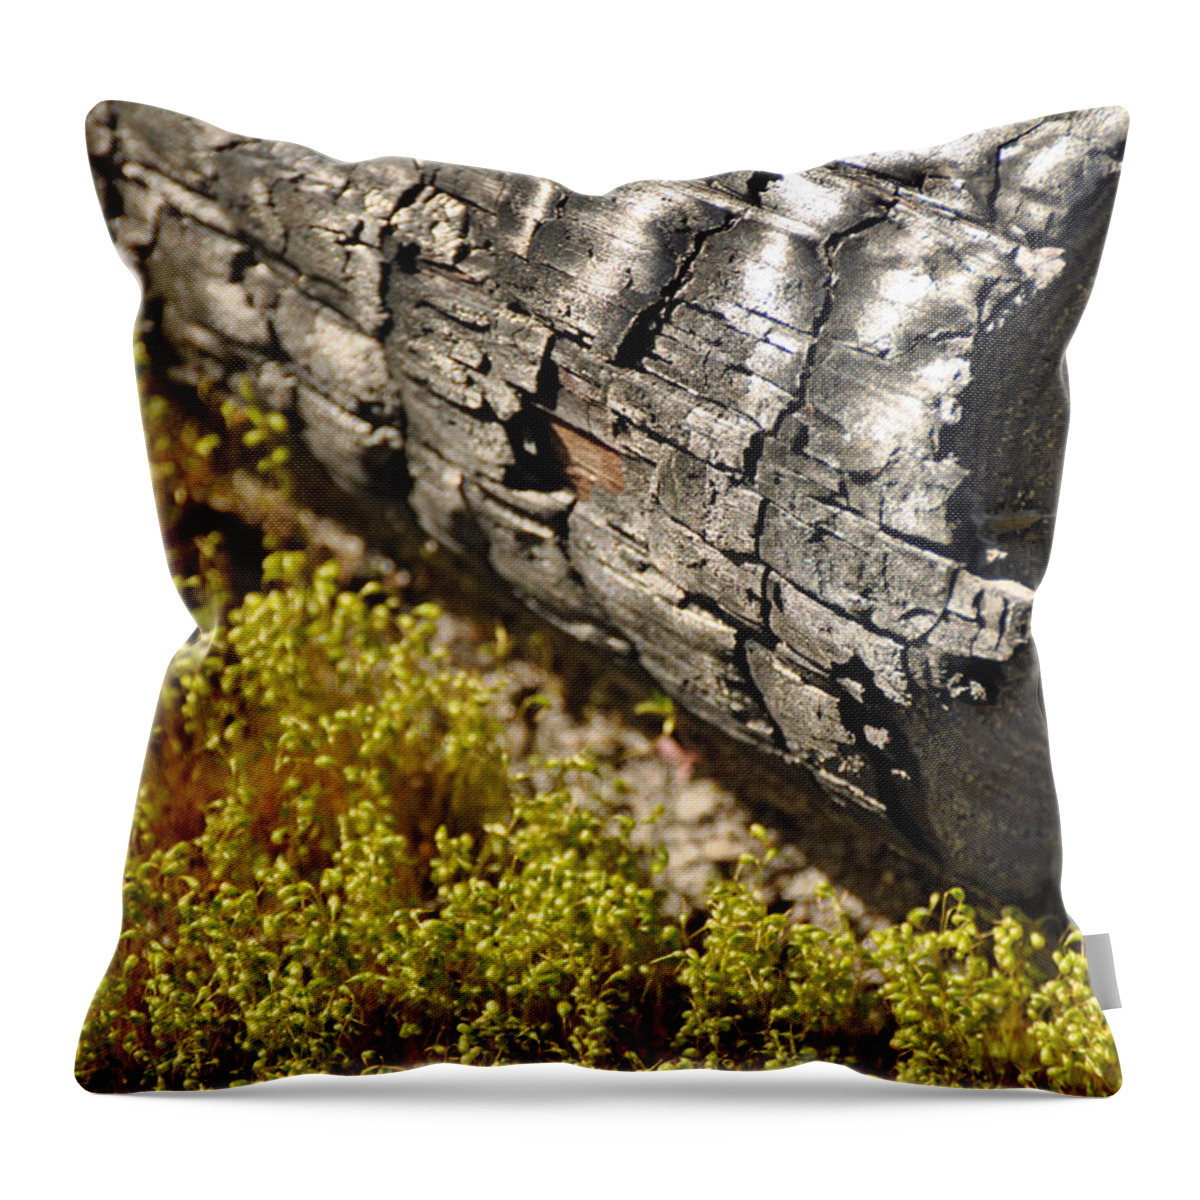 Burn Throw Pillow featuring the photograph Burned Log Yellow Grasses by Bruce Gourley